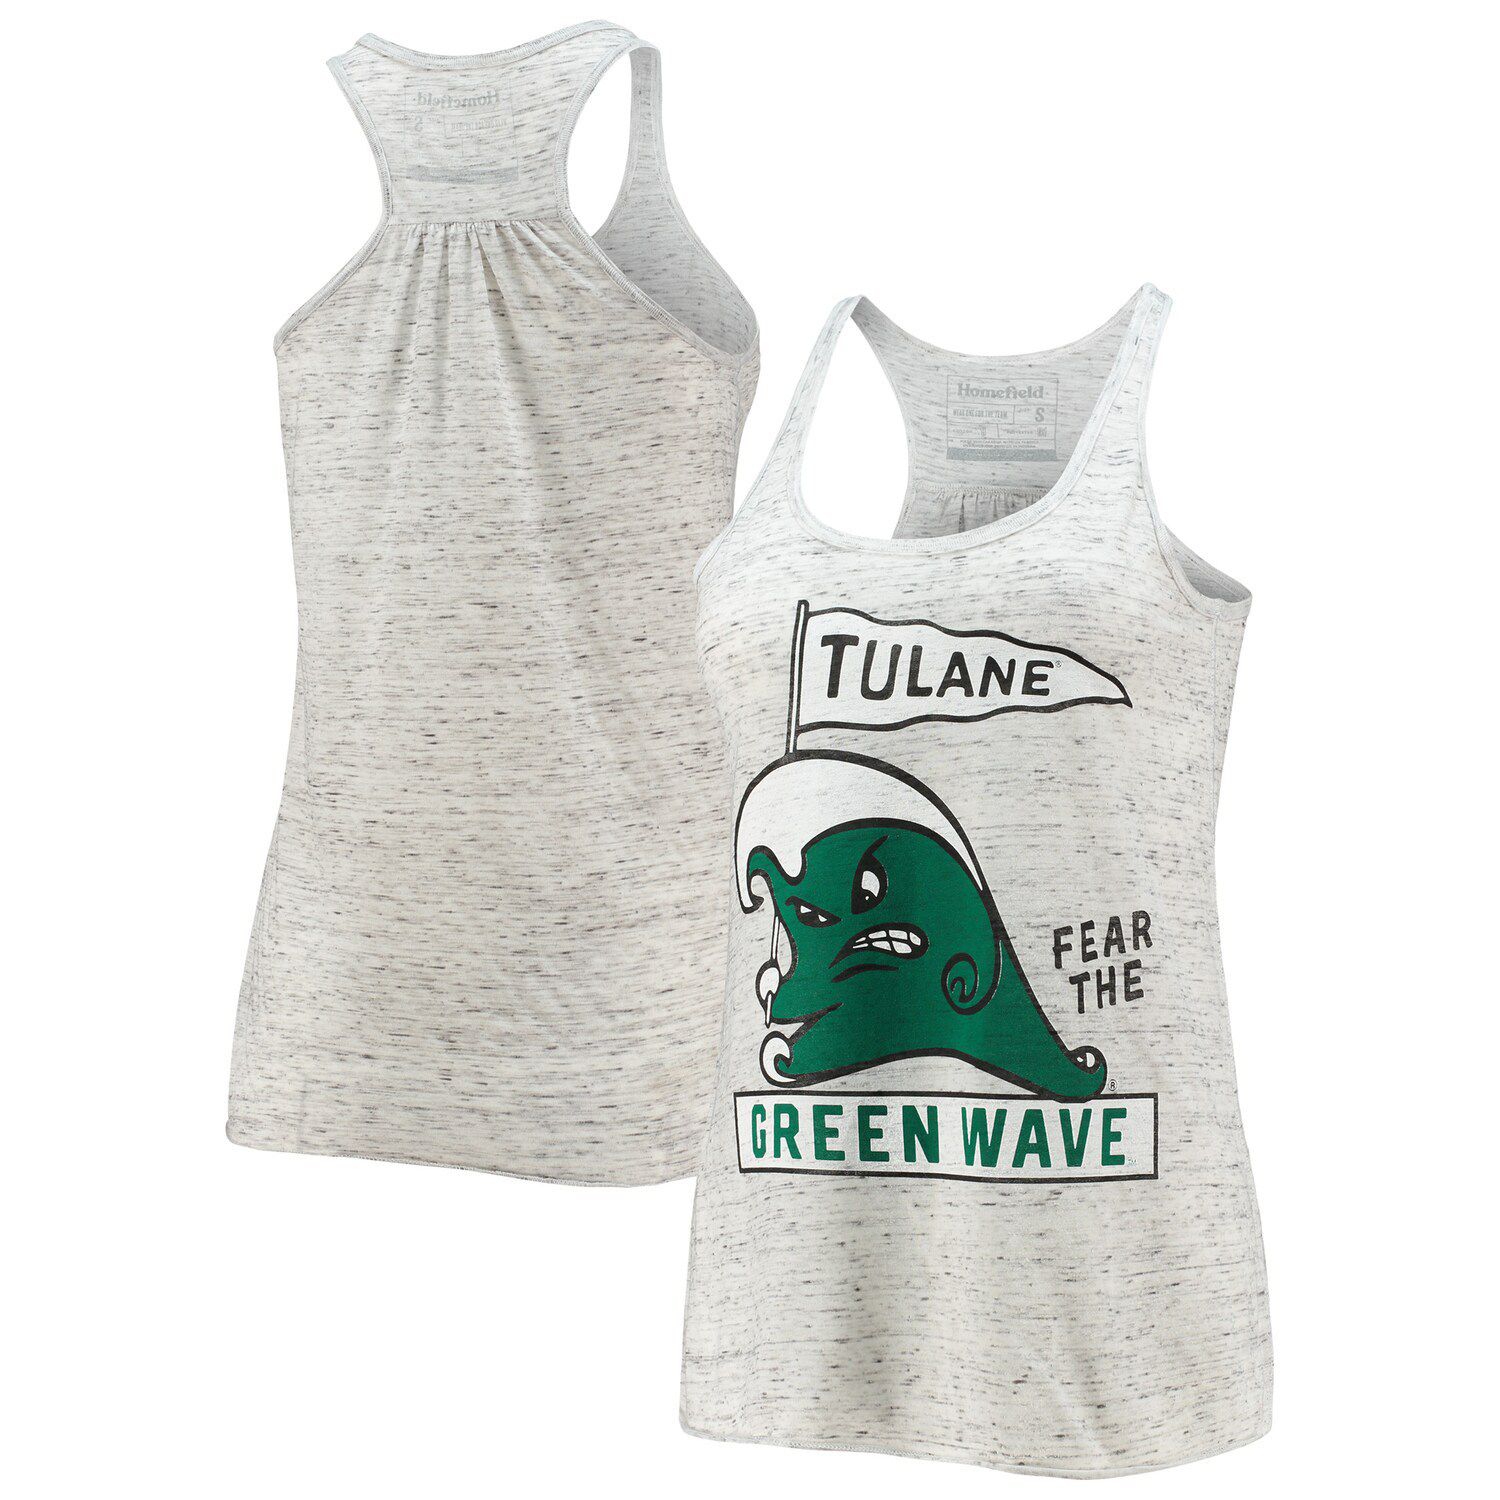 Image for Unbranded Women's Homefield Ash Tulane Green Wave Vintage Fear The Green Wave Racerback Slub Tank Top at Kohl's.